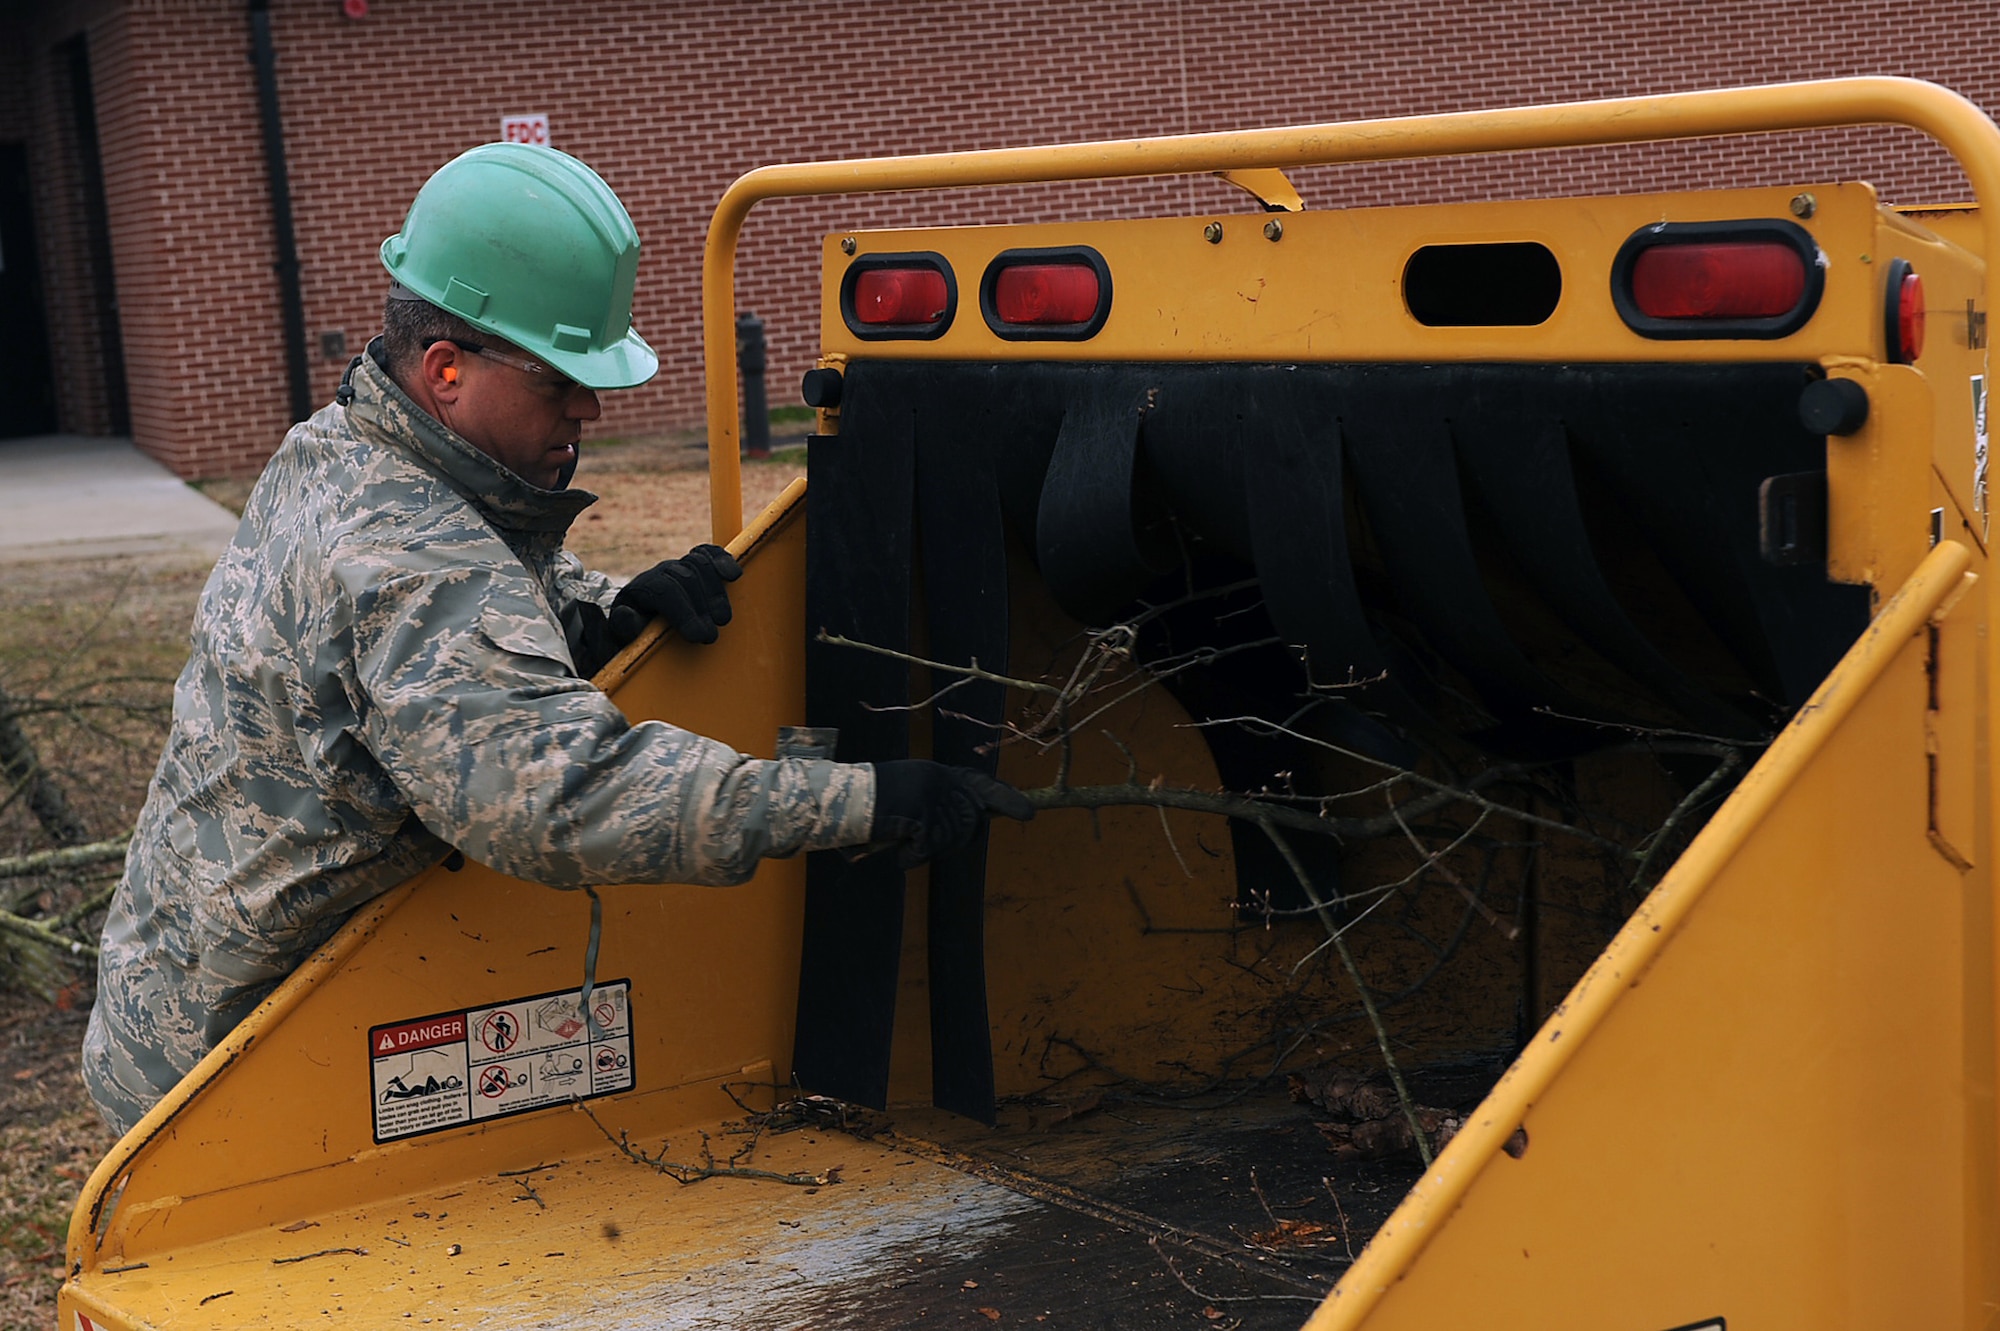 Tech Sgt. Robert Echols, 567th RED HORSE Squadron heavy equipment operator, pushes tree limbs into a wood chipper on Seymour Johnson Air Force Base, N.C., Feb. 24, 2010. After the Airmen prune the branches they place them in a wood chipper, remains are taken to a waste industries site off-base for use as mulch and compost. Echols hails from Ludlow, Mass. (U.S. Air Force photo/Senior Airman Ciara Wymbs) 